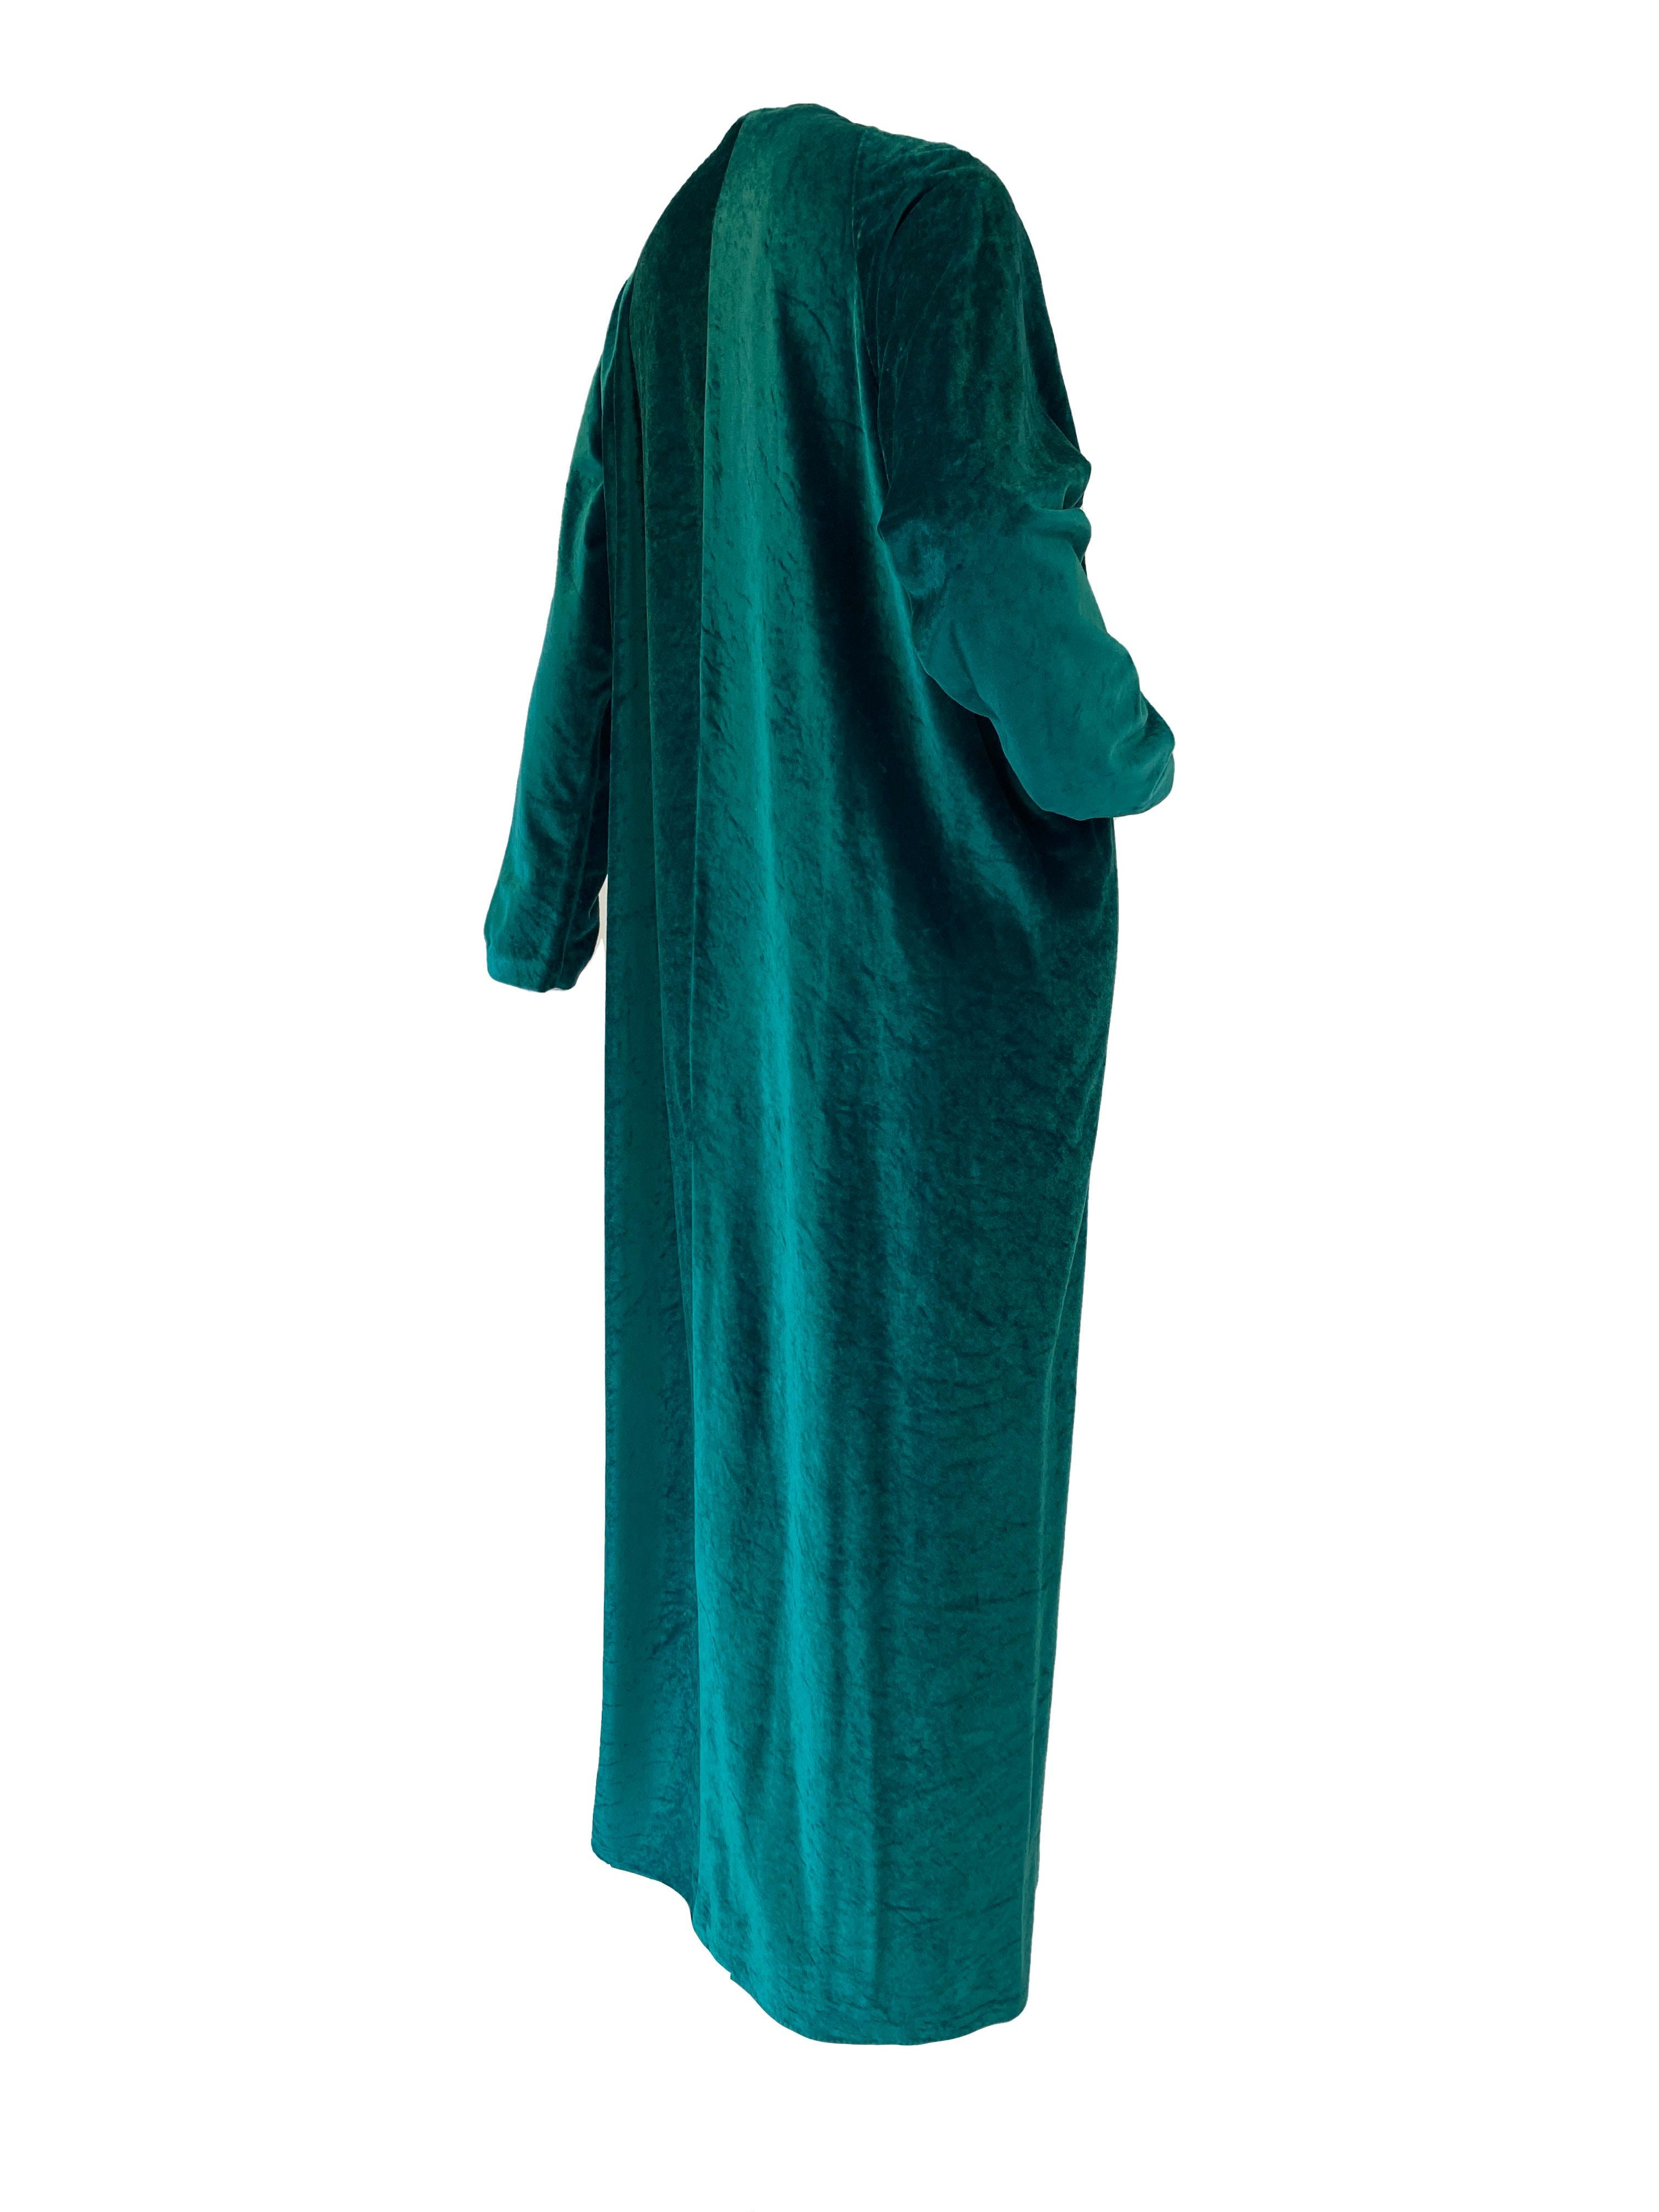 Early 1980’s Halston IV Green Velvet Jersey Caftan In Good Condition For Sale In Houston, TX